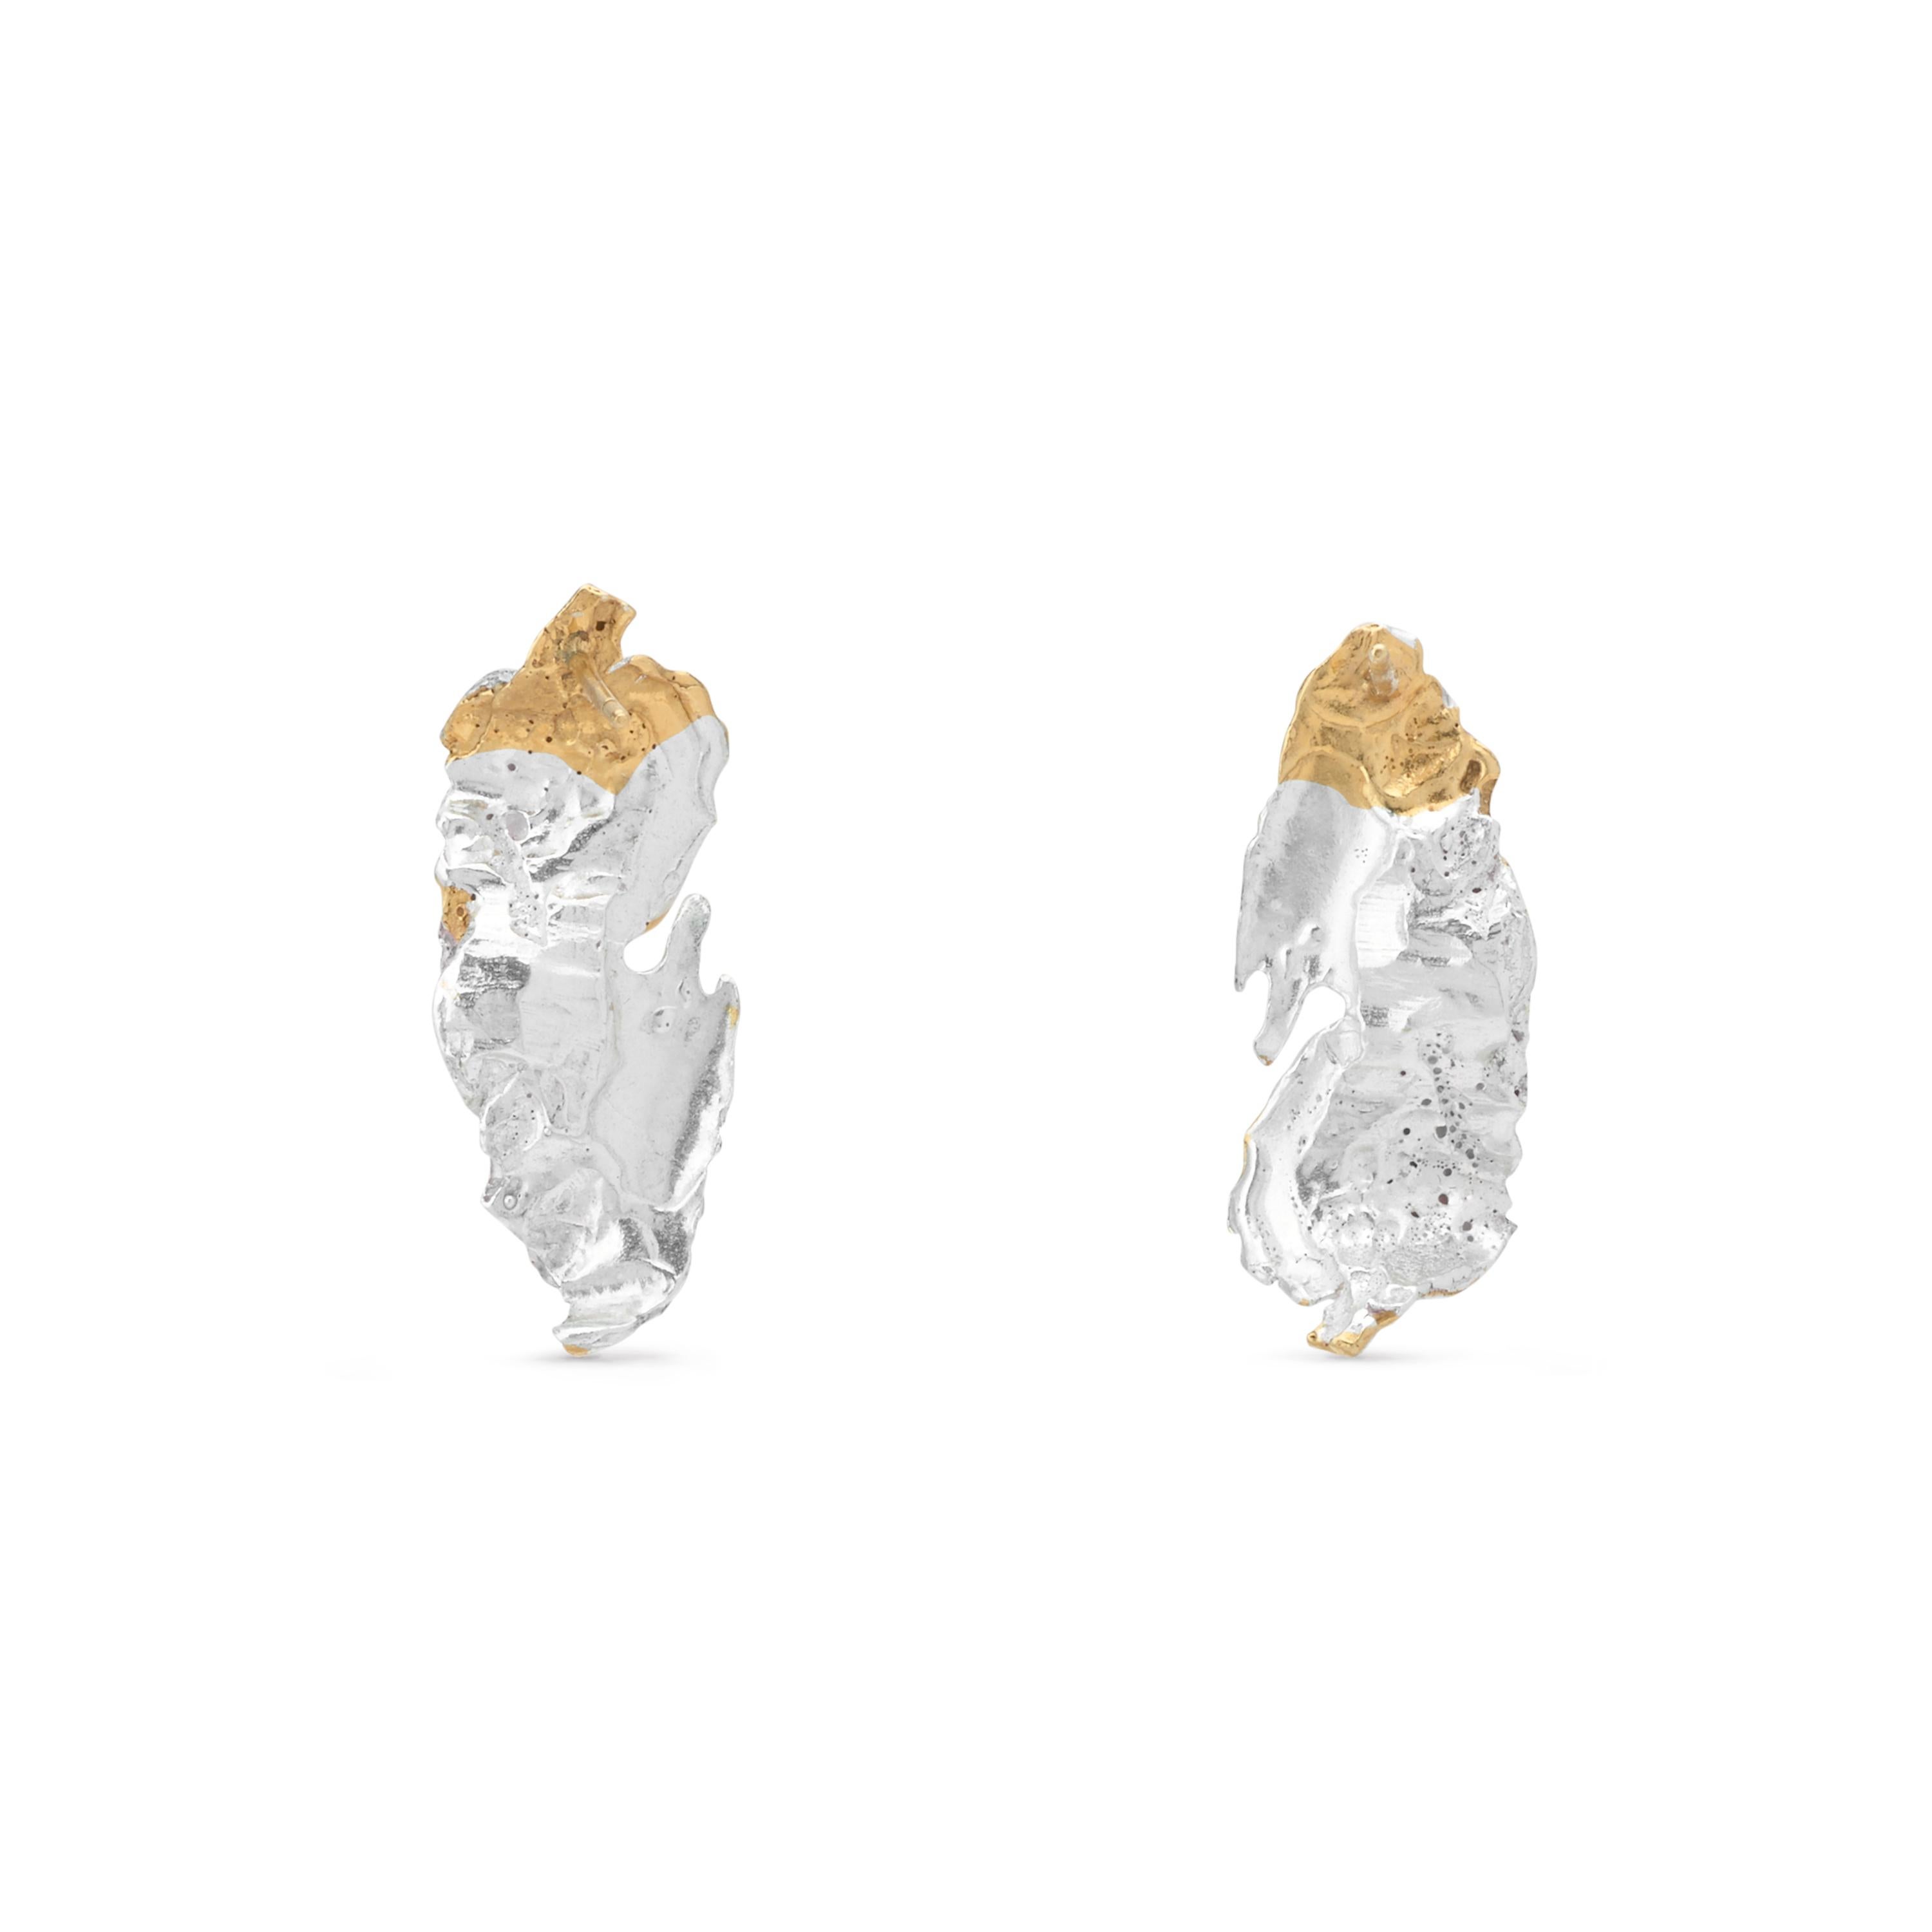 Anani is a biblical name meaning ‘cloud’. The ethereal, rounded shapes of these beautiful earrings reflect the amorphous, random figures that clouds take on as they form, just as their muted gold and silver hues are reminiscent of the combination of